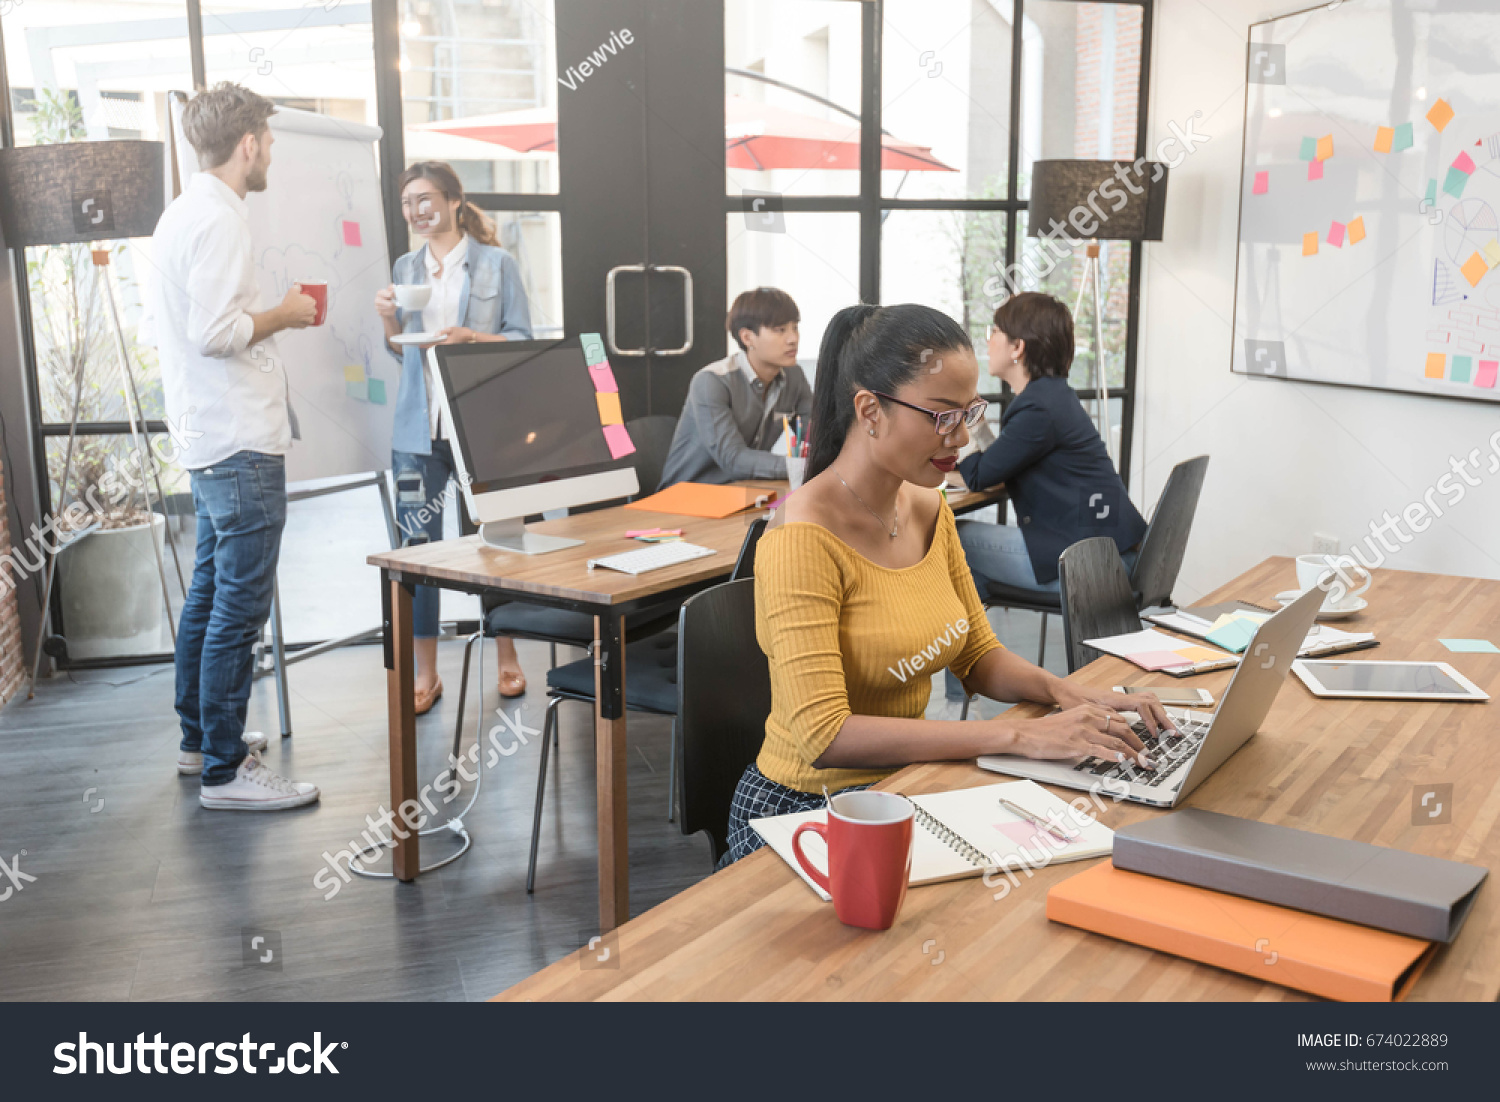 Group of creative worker brainstorm together in office, new style of workspace #674022889